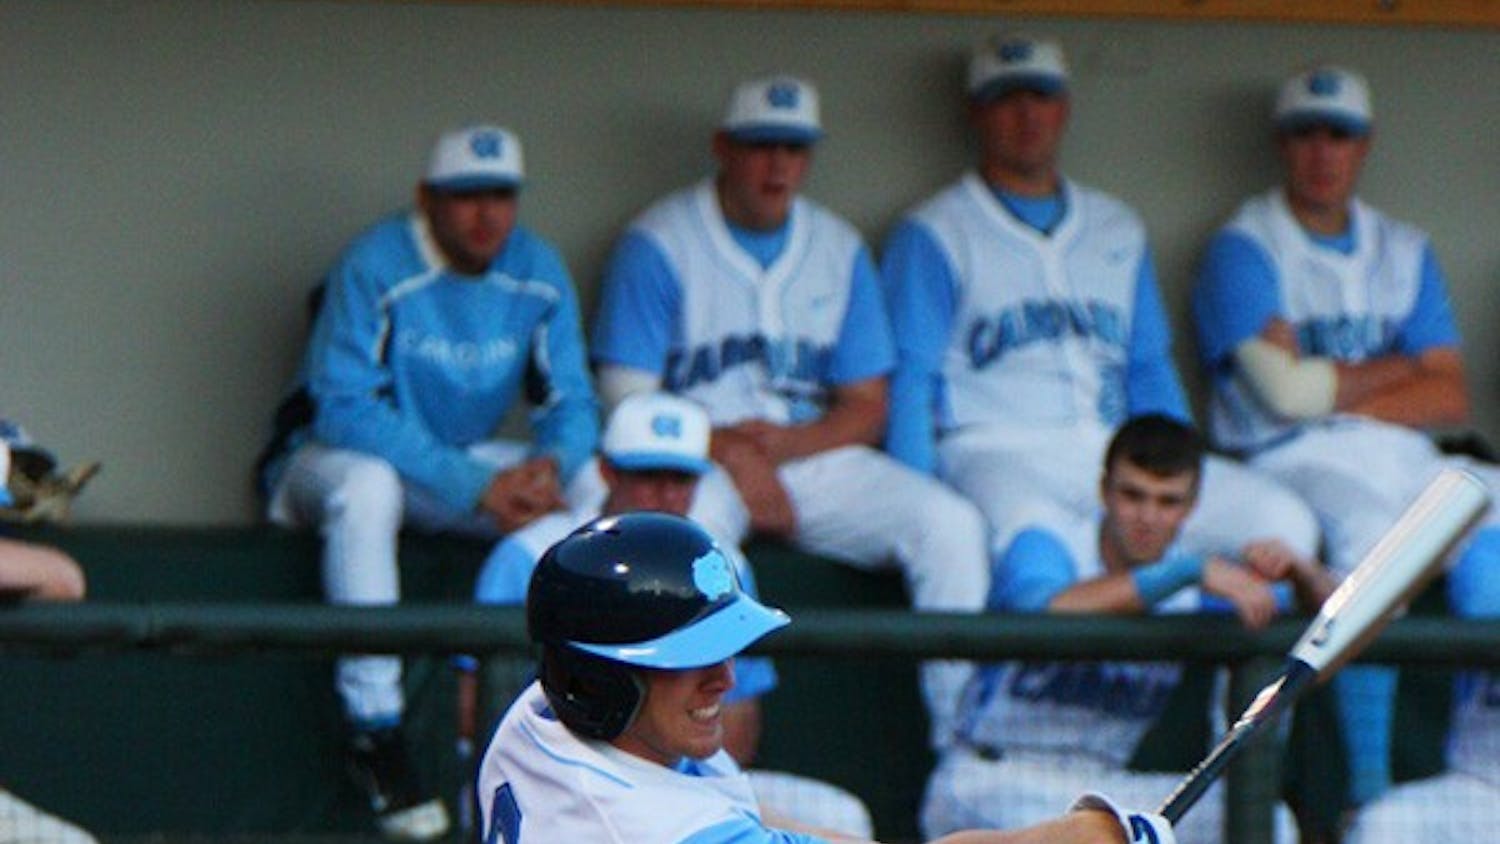 UNC first baseman Dillon Hazlett went 1-for-3 against Winthrop on Tuesday. DTH/Mary-Alice Warren